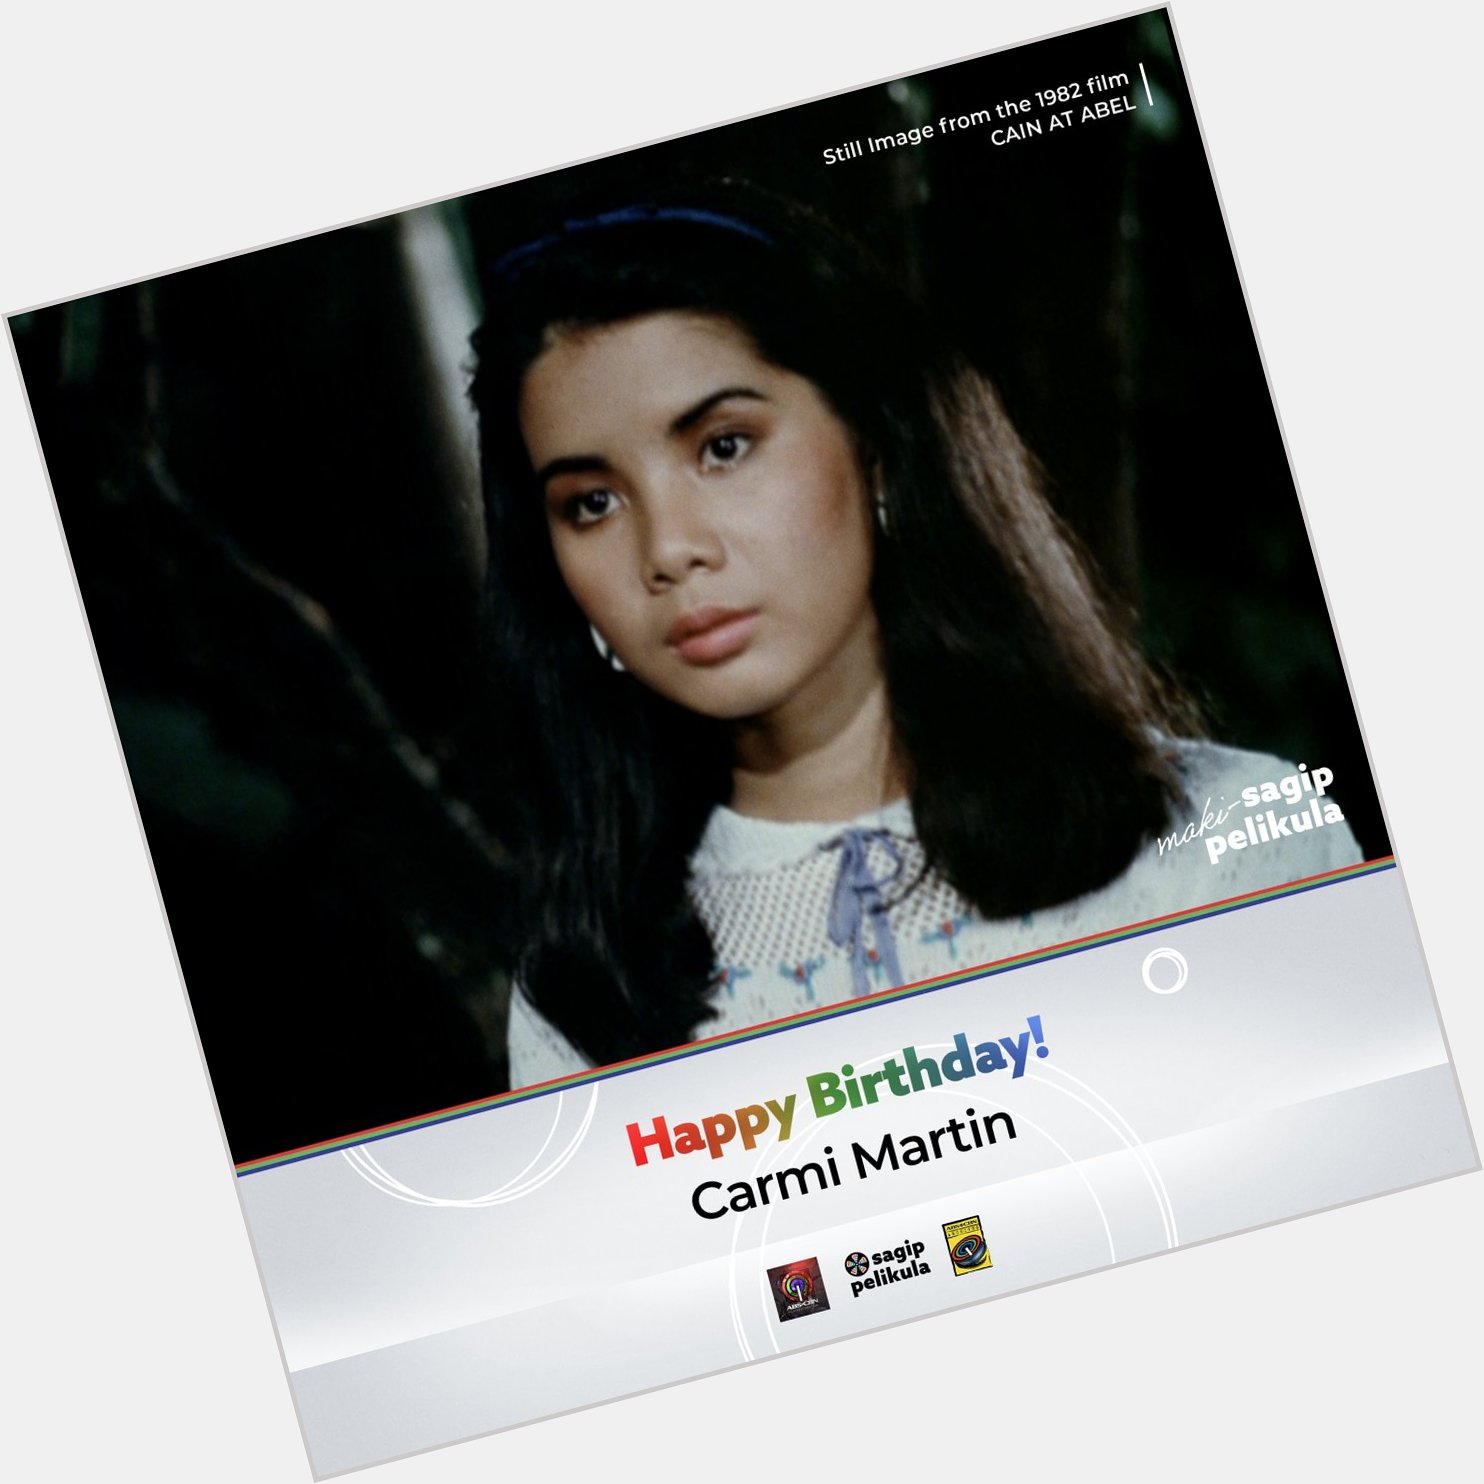 Happy birthday to Carmi Martin!

What\s your favorite film of hers?   